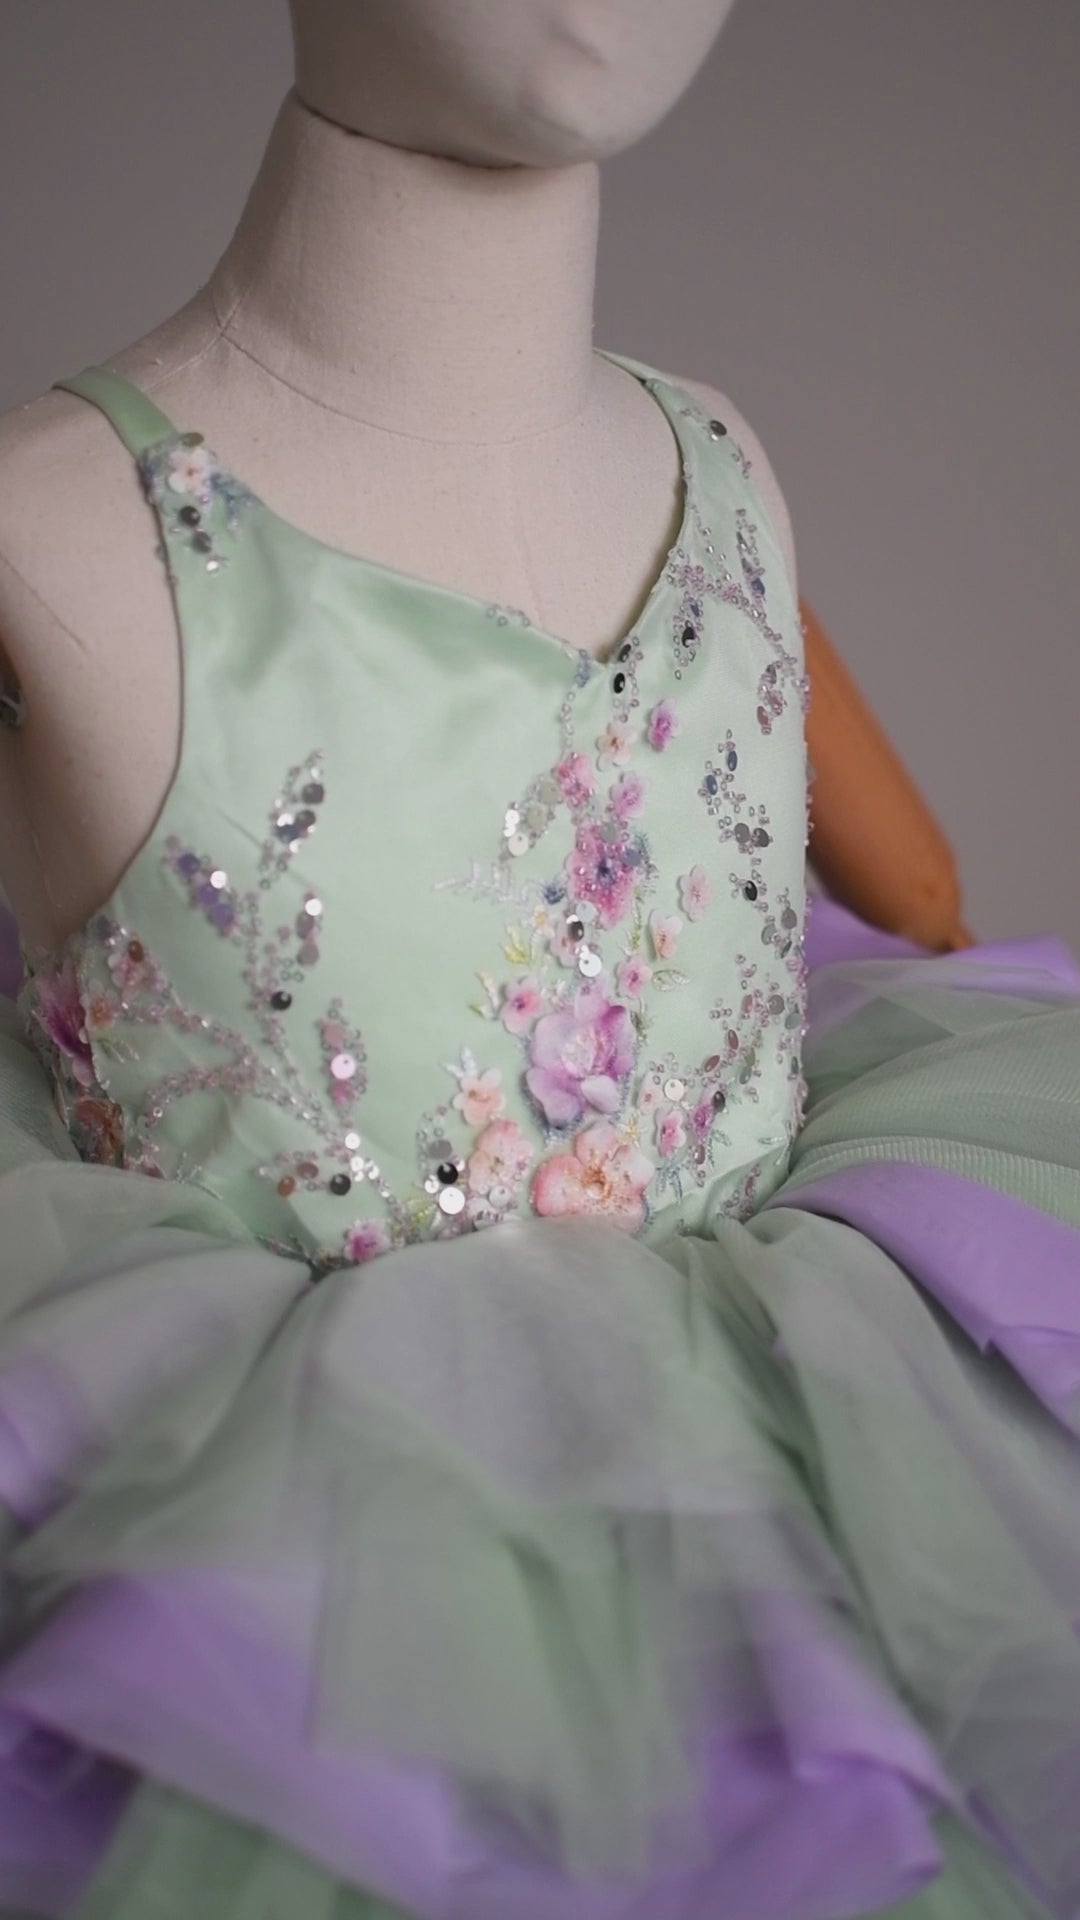 Short-style sage green dress with beaded sequin bodice and adjustable shoulder ties. Ideal for a charming and comfortable look. "Image of 'Meadow Mist' Petal Length Dress for Ages 4 to Petite 7 - Sage Green with Purple Accents"